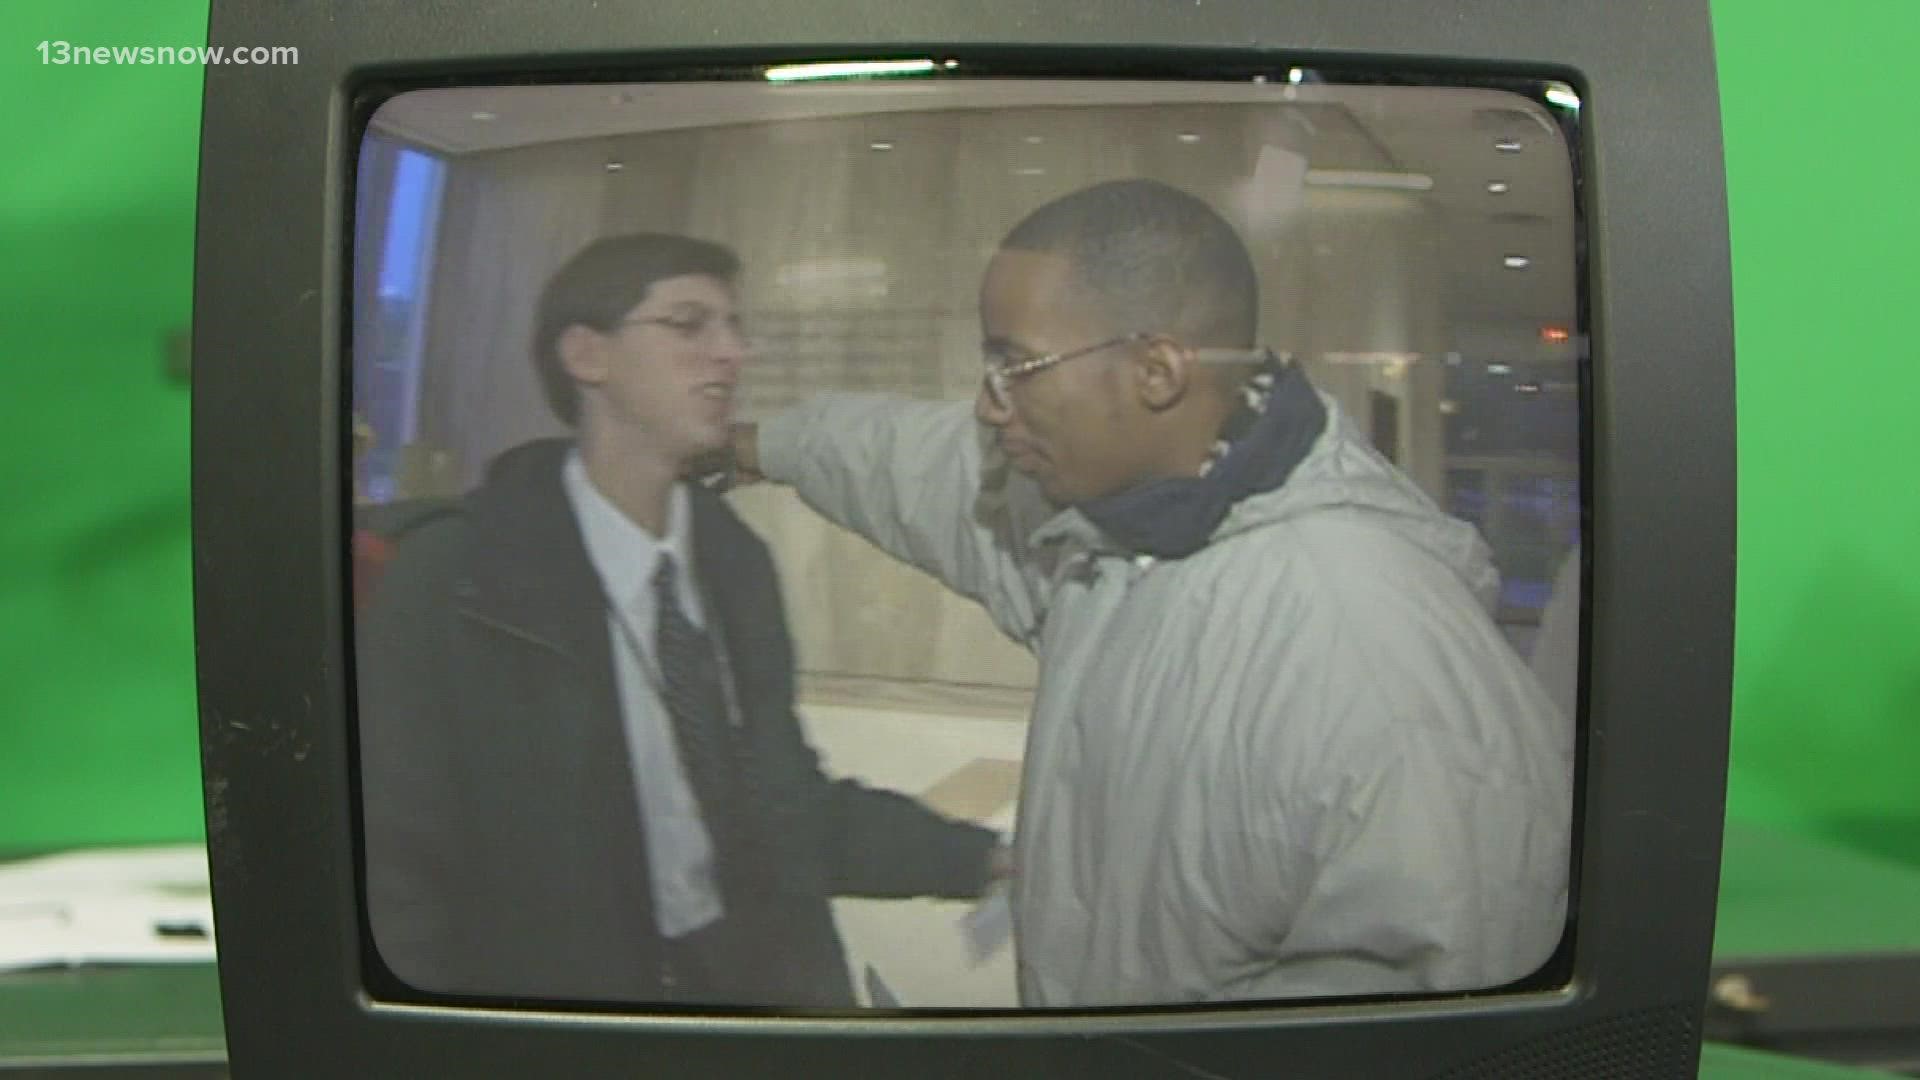 In 1998, 12 local students went on a journey to the Civil Rights south together. 13News Now followed along.